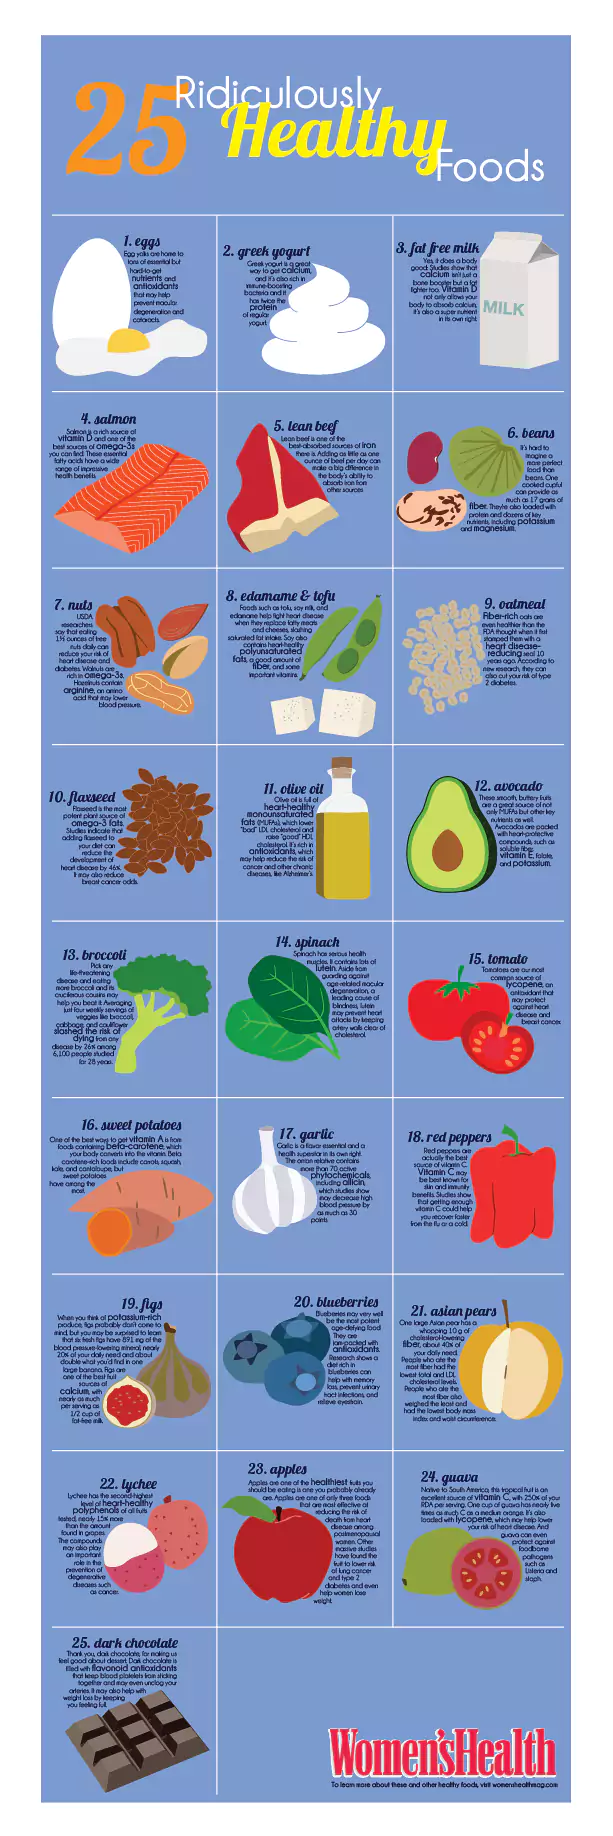 25 Ridiculously Healthy Foods